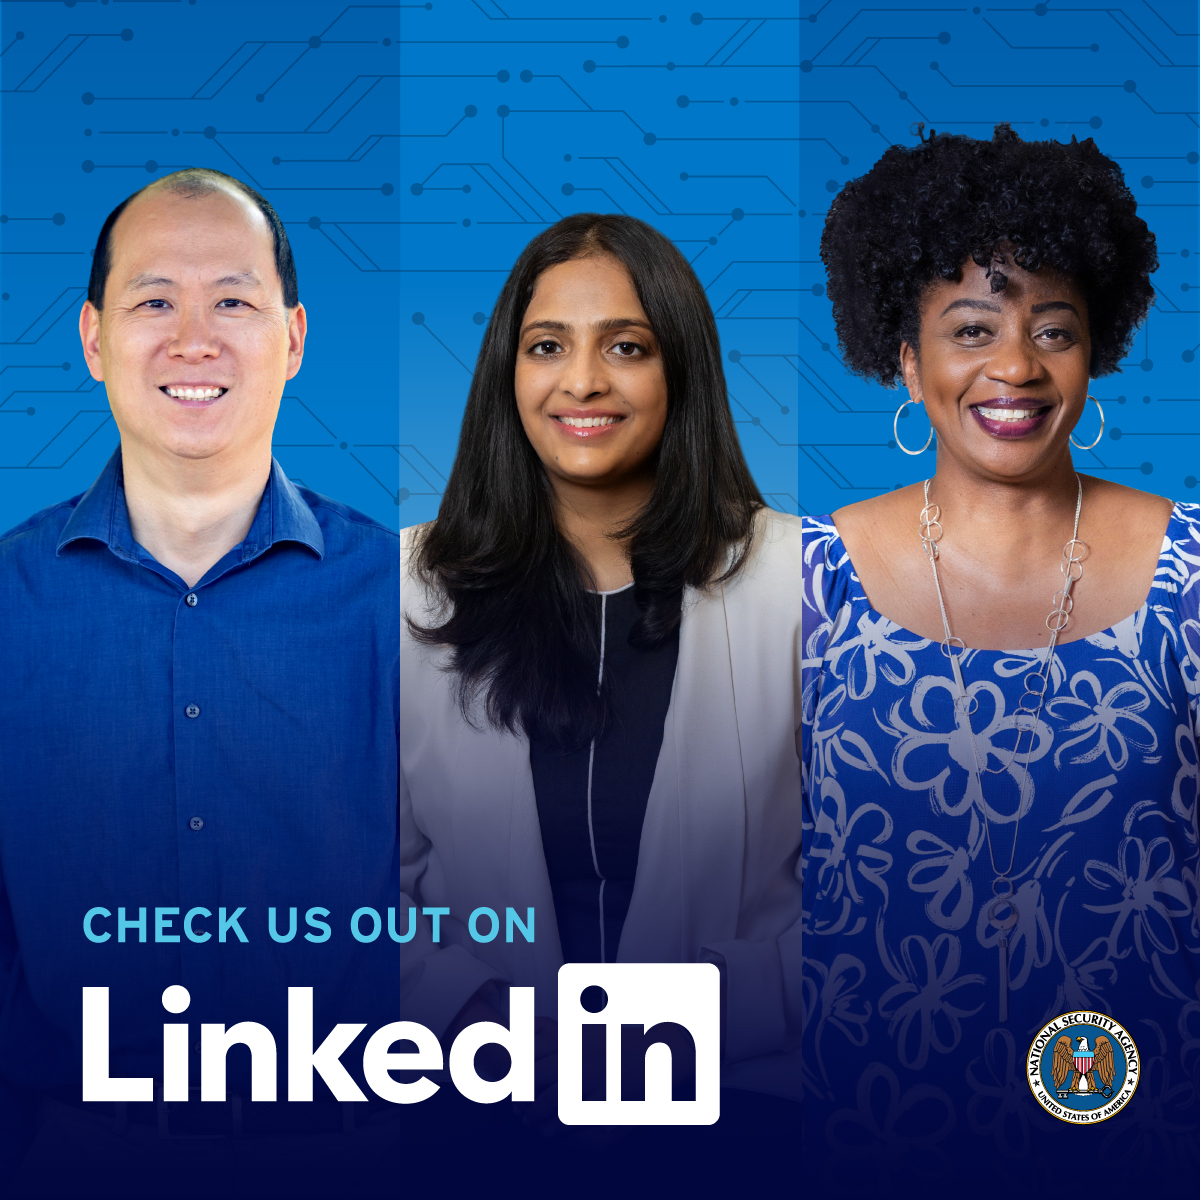 Looking for a quick and easy way to learn about #NSA’s mission, benefits, job opportunities and more? Check out our new #LinkedInLife pages: bit.ly/3Myvzyp.

#companyculture #companybenefits #govtjobs #governmentjobs #nationalsecurity